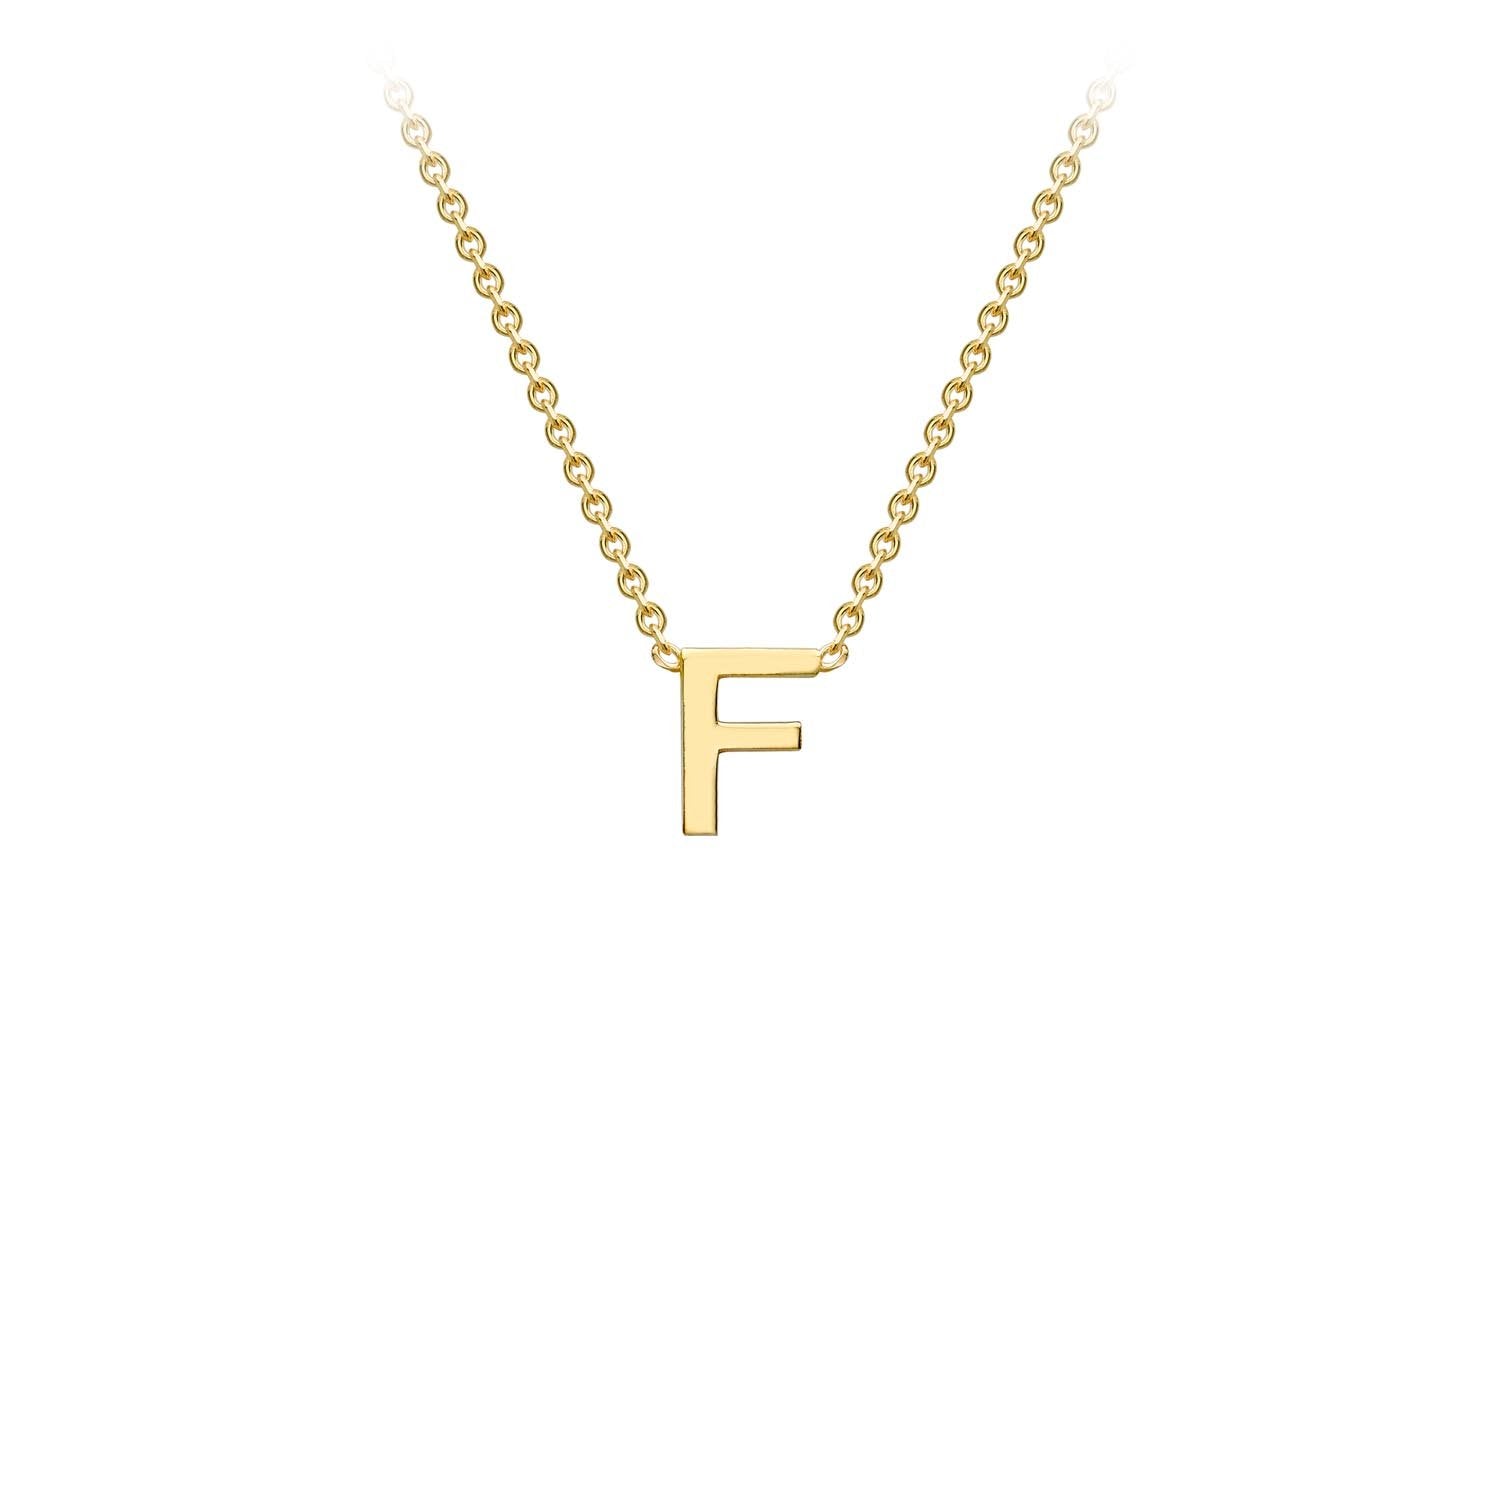 9ct Yellow Gold 'F' Petite Initial Adjustable Letter Necklace 38/43cm